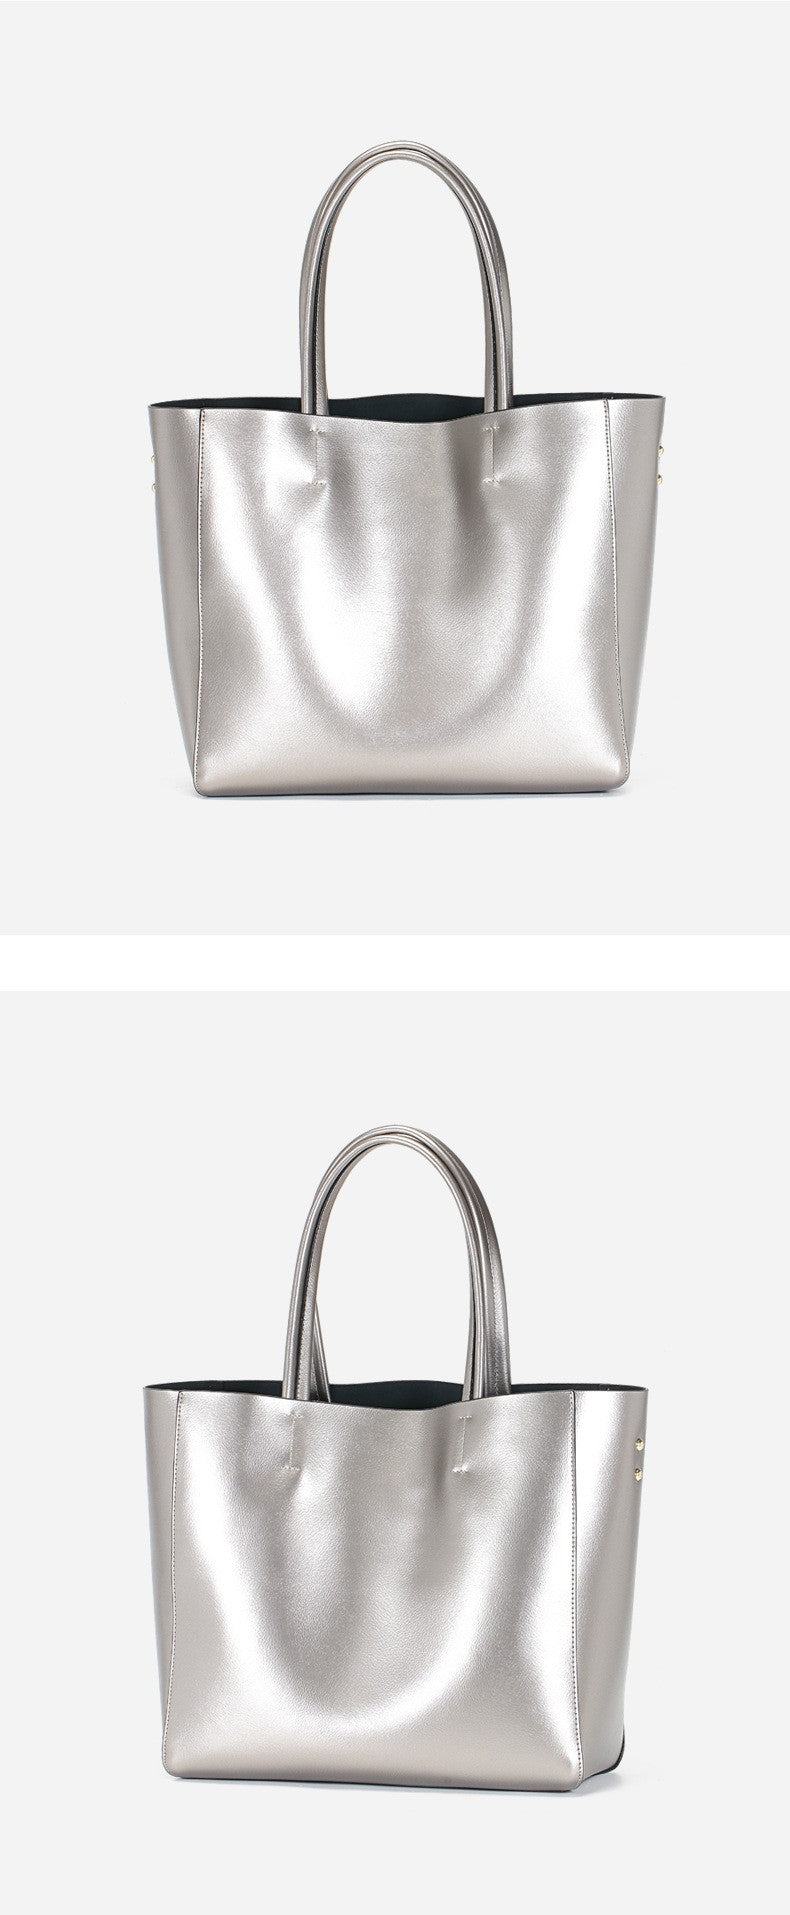 HIMODA glossy leather tote bag - detail 3